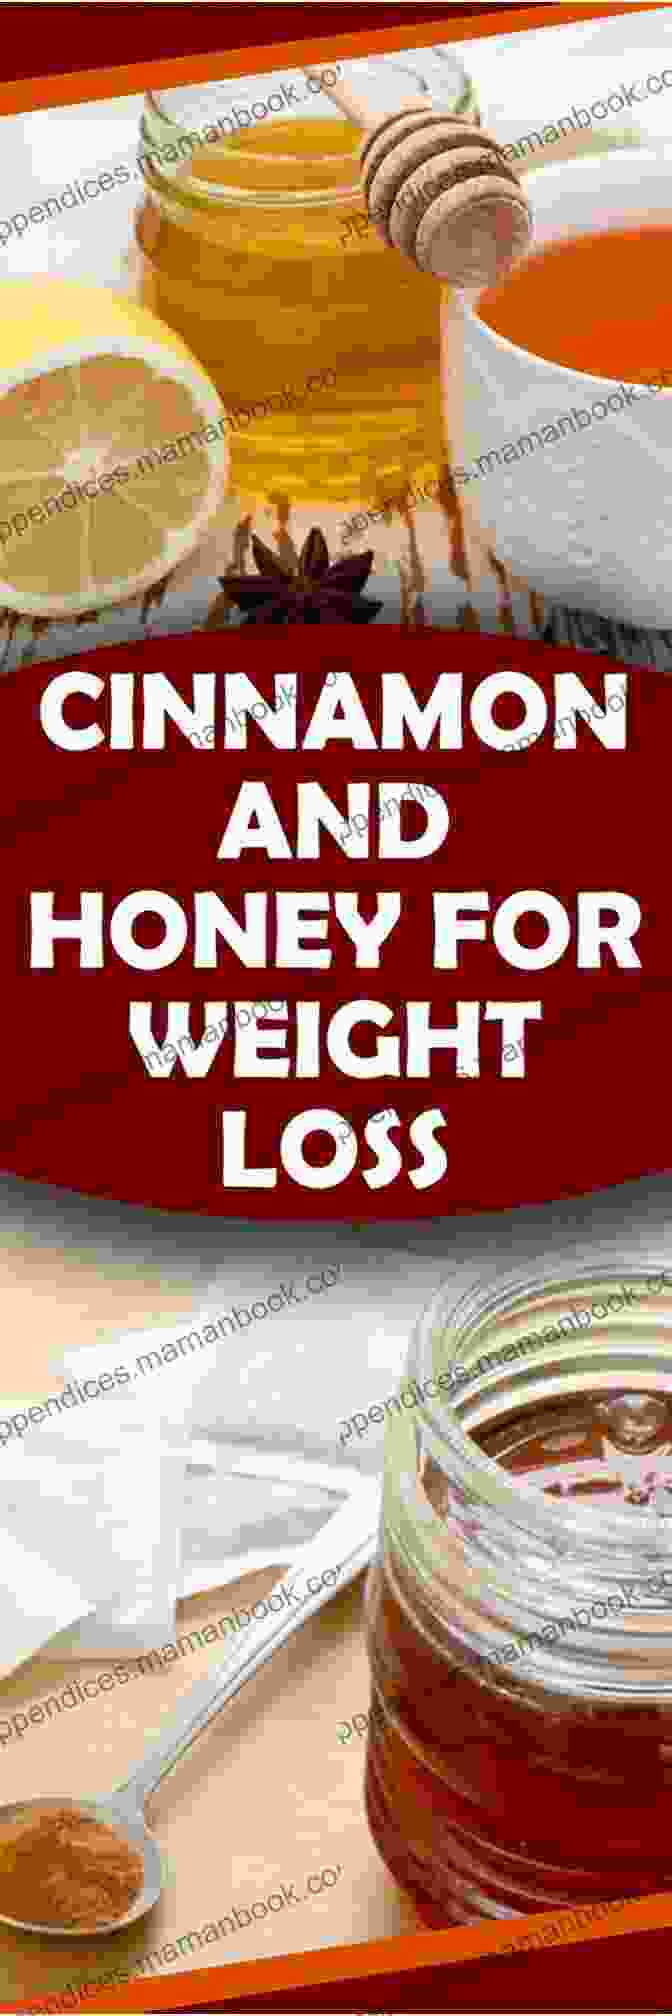 Honey Used As A Weight Management Aid 34 Uses For Honey (Natural Health 1)